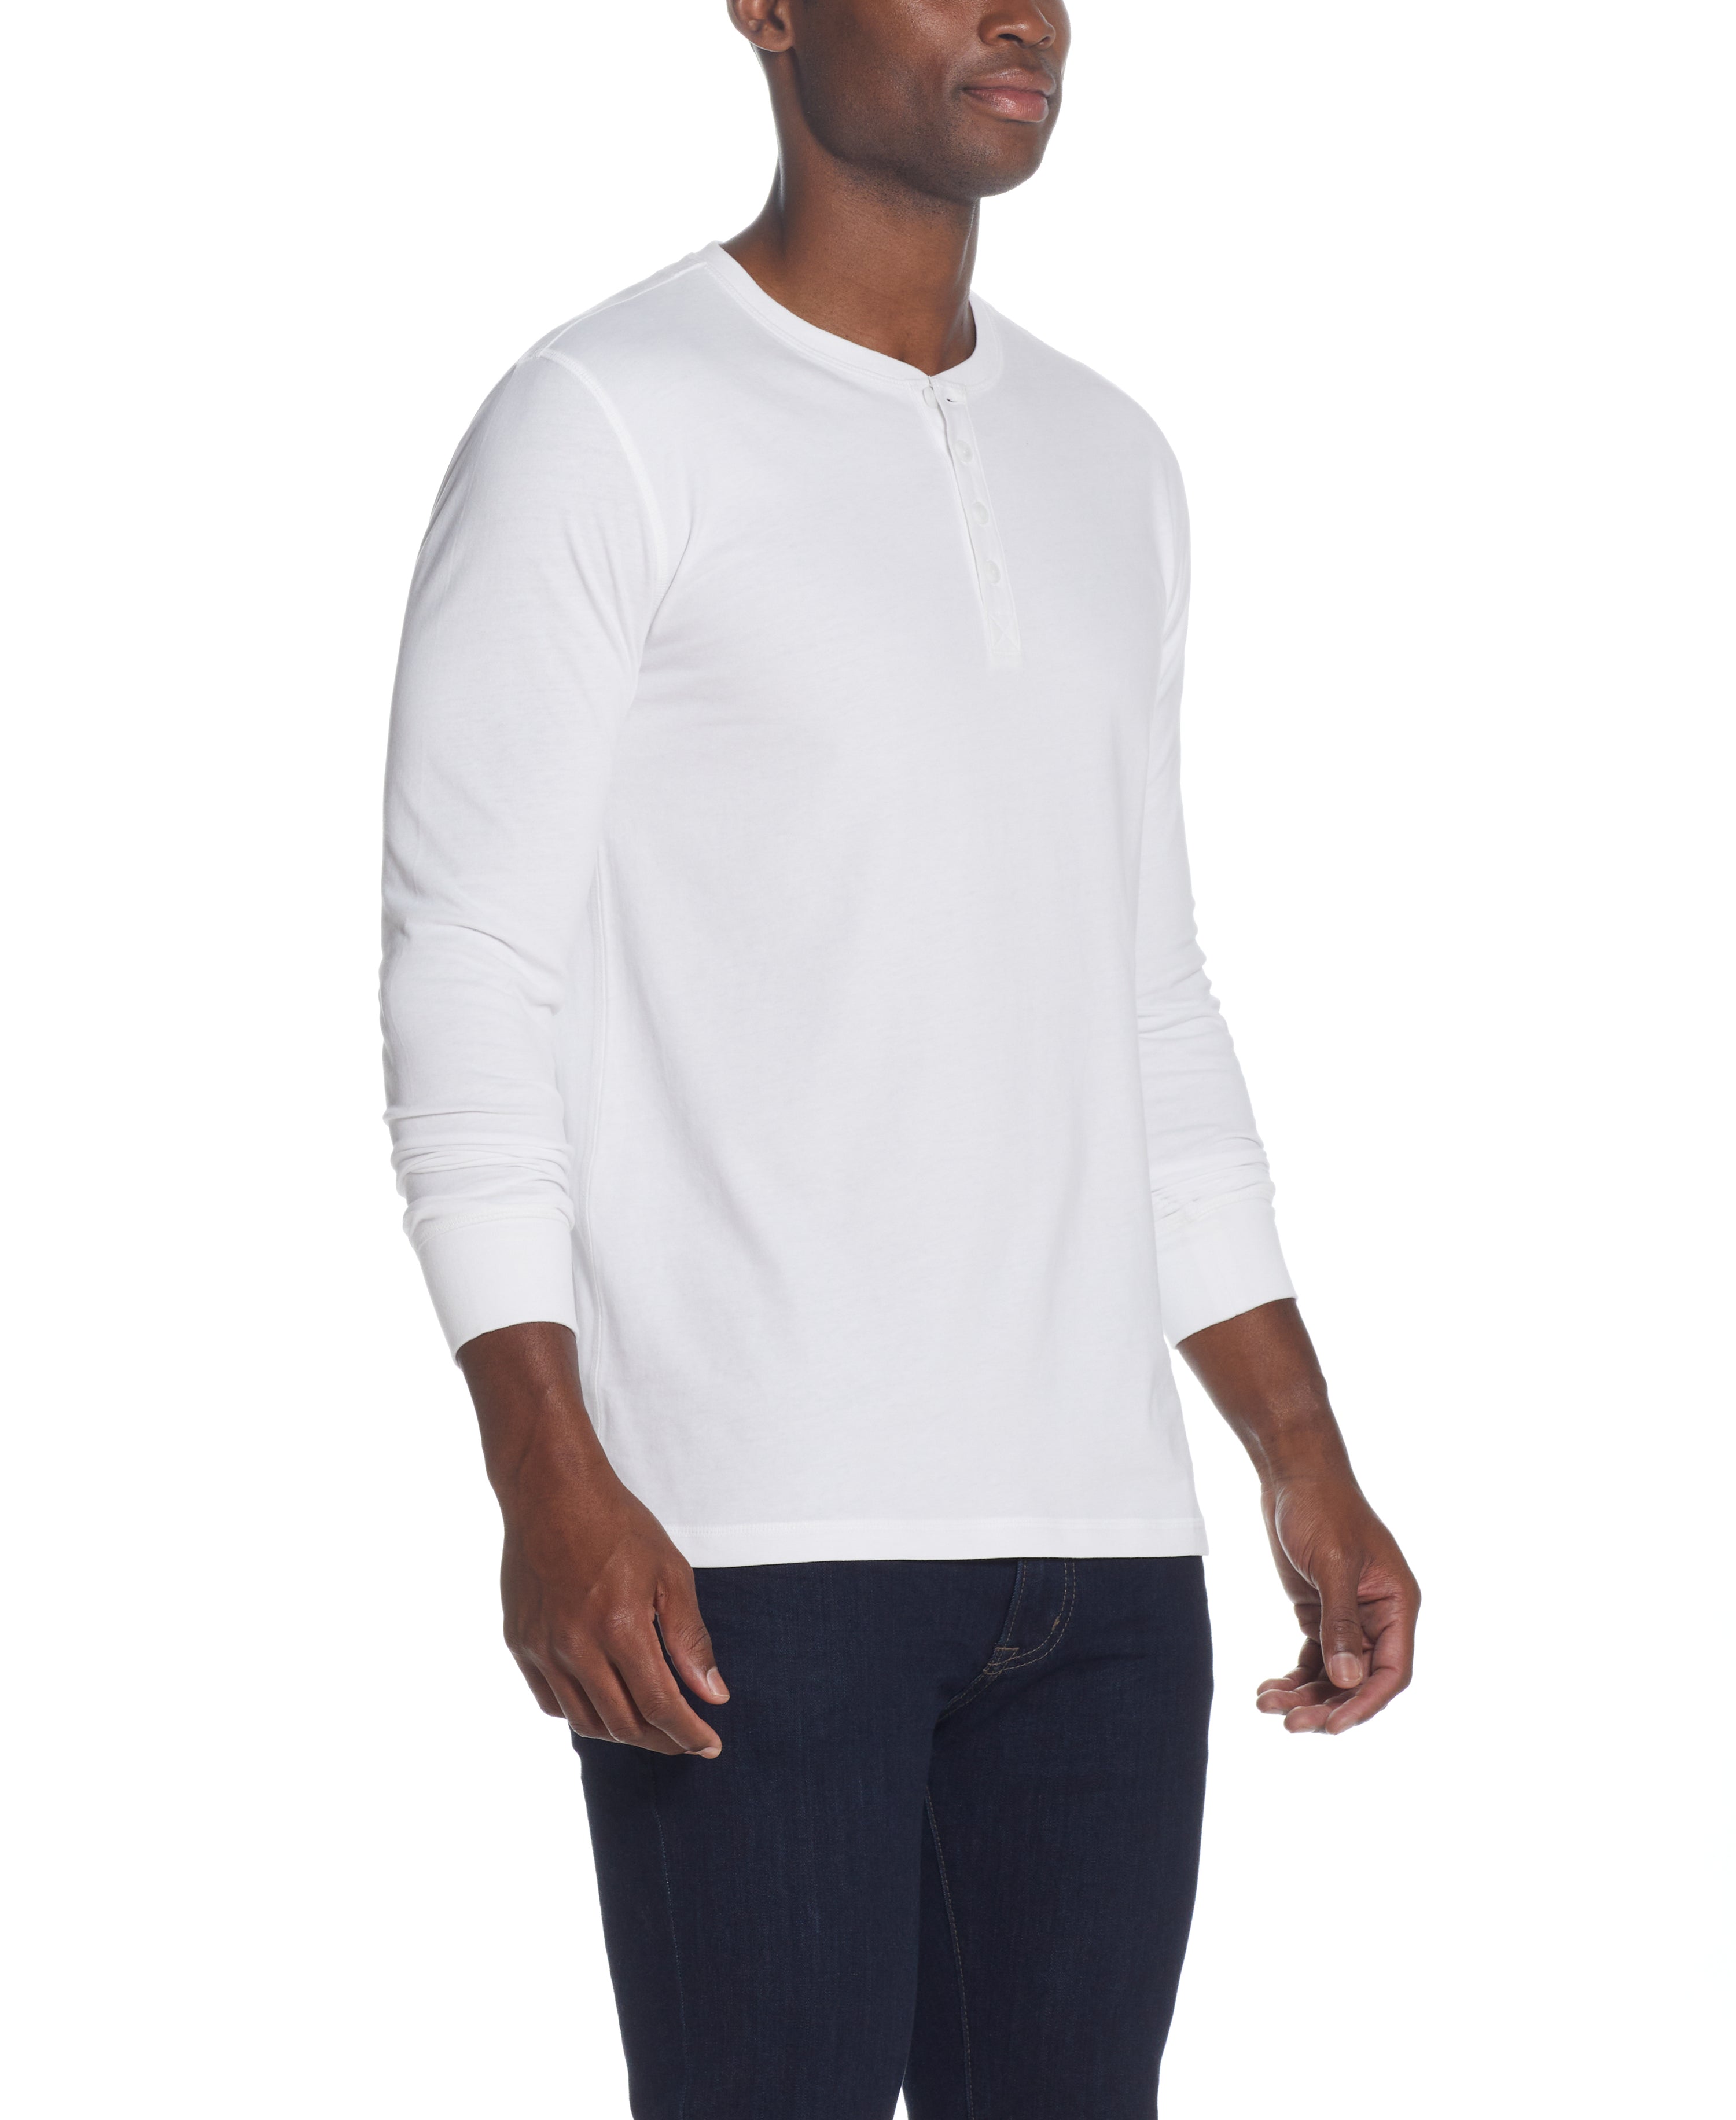 L/S BRUSHED JERSEY HENLEY in WHITE